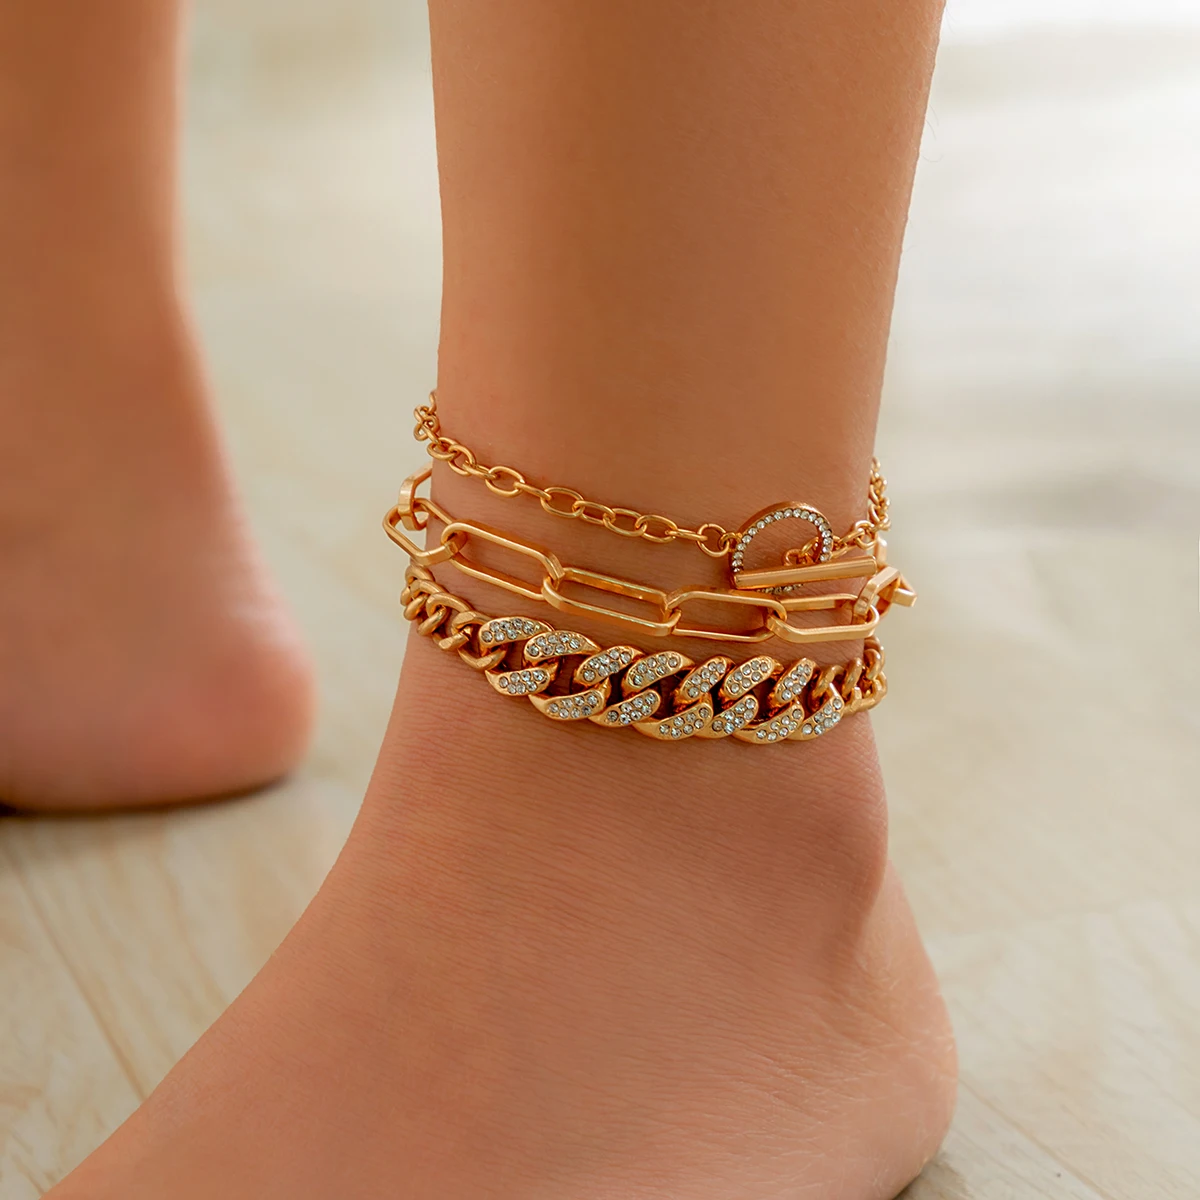 

Lacteo Goth Rhinestone Cuban Chain Anklets Set for Women Jewelry Metal Link Anklet Foot Bracelet Beach Summer Accessories 2023